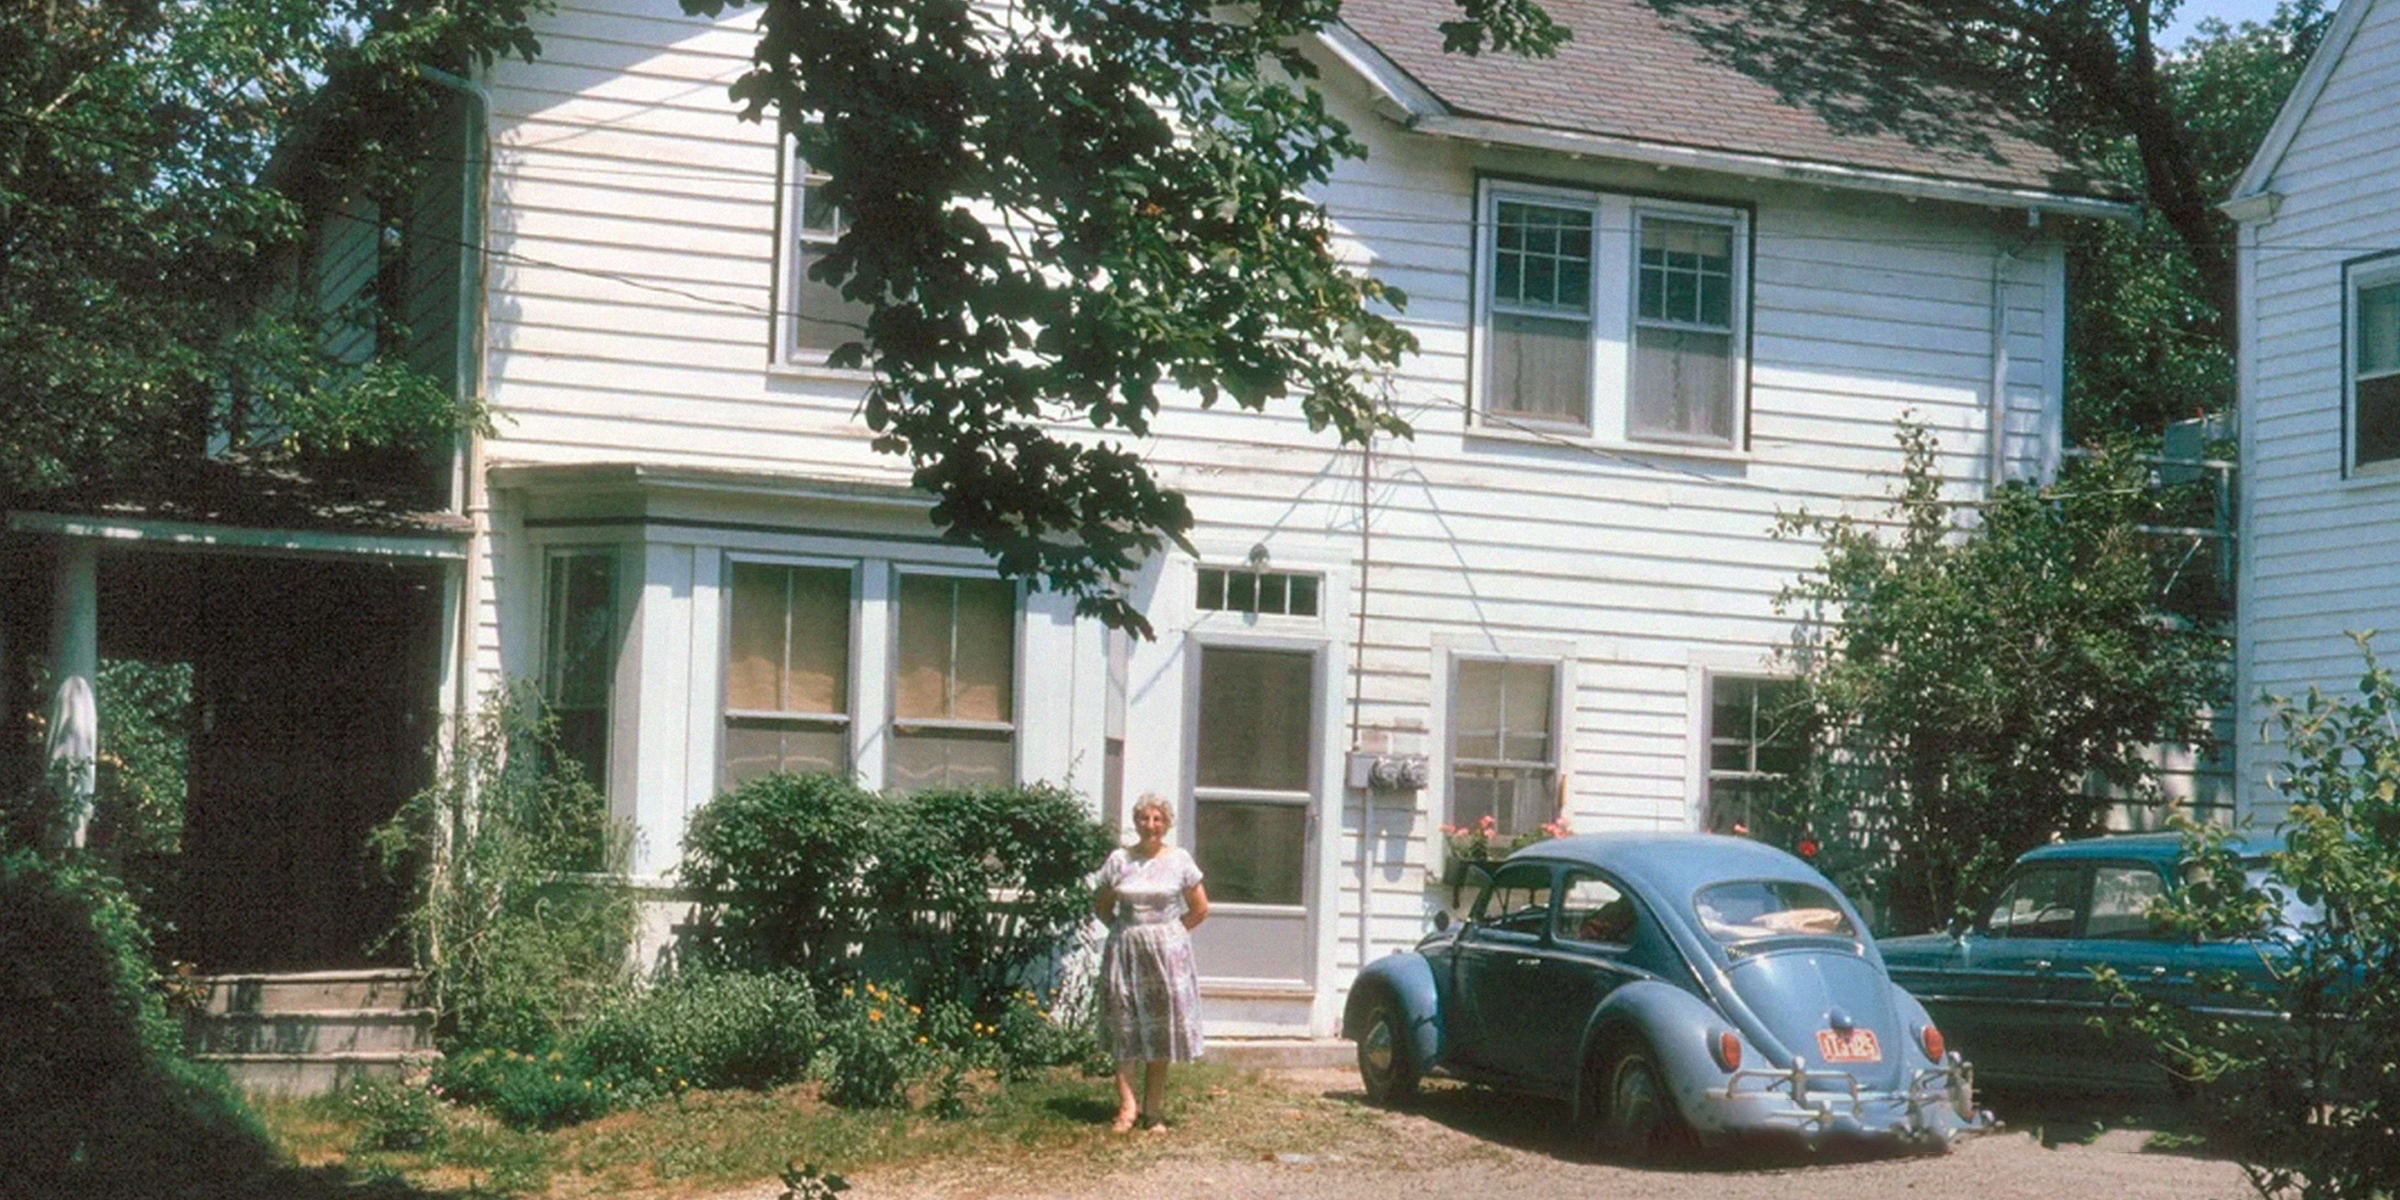 Someone's grandmother near her home | Source: Reddit.com/r/TheWayWeWere